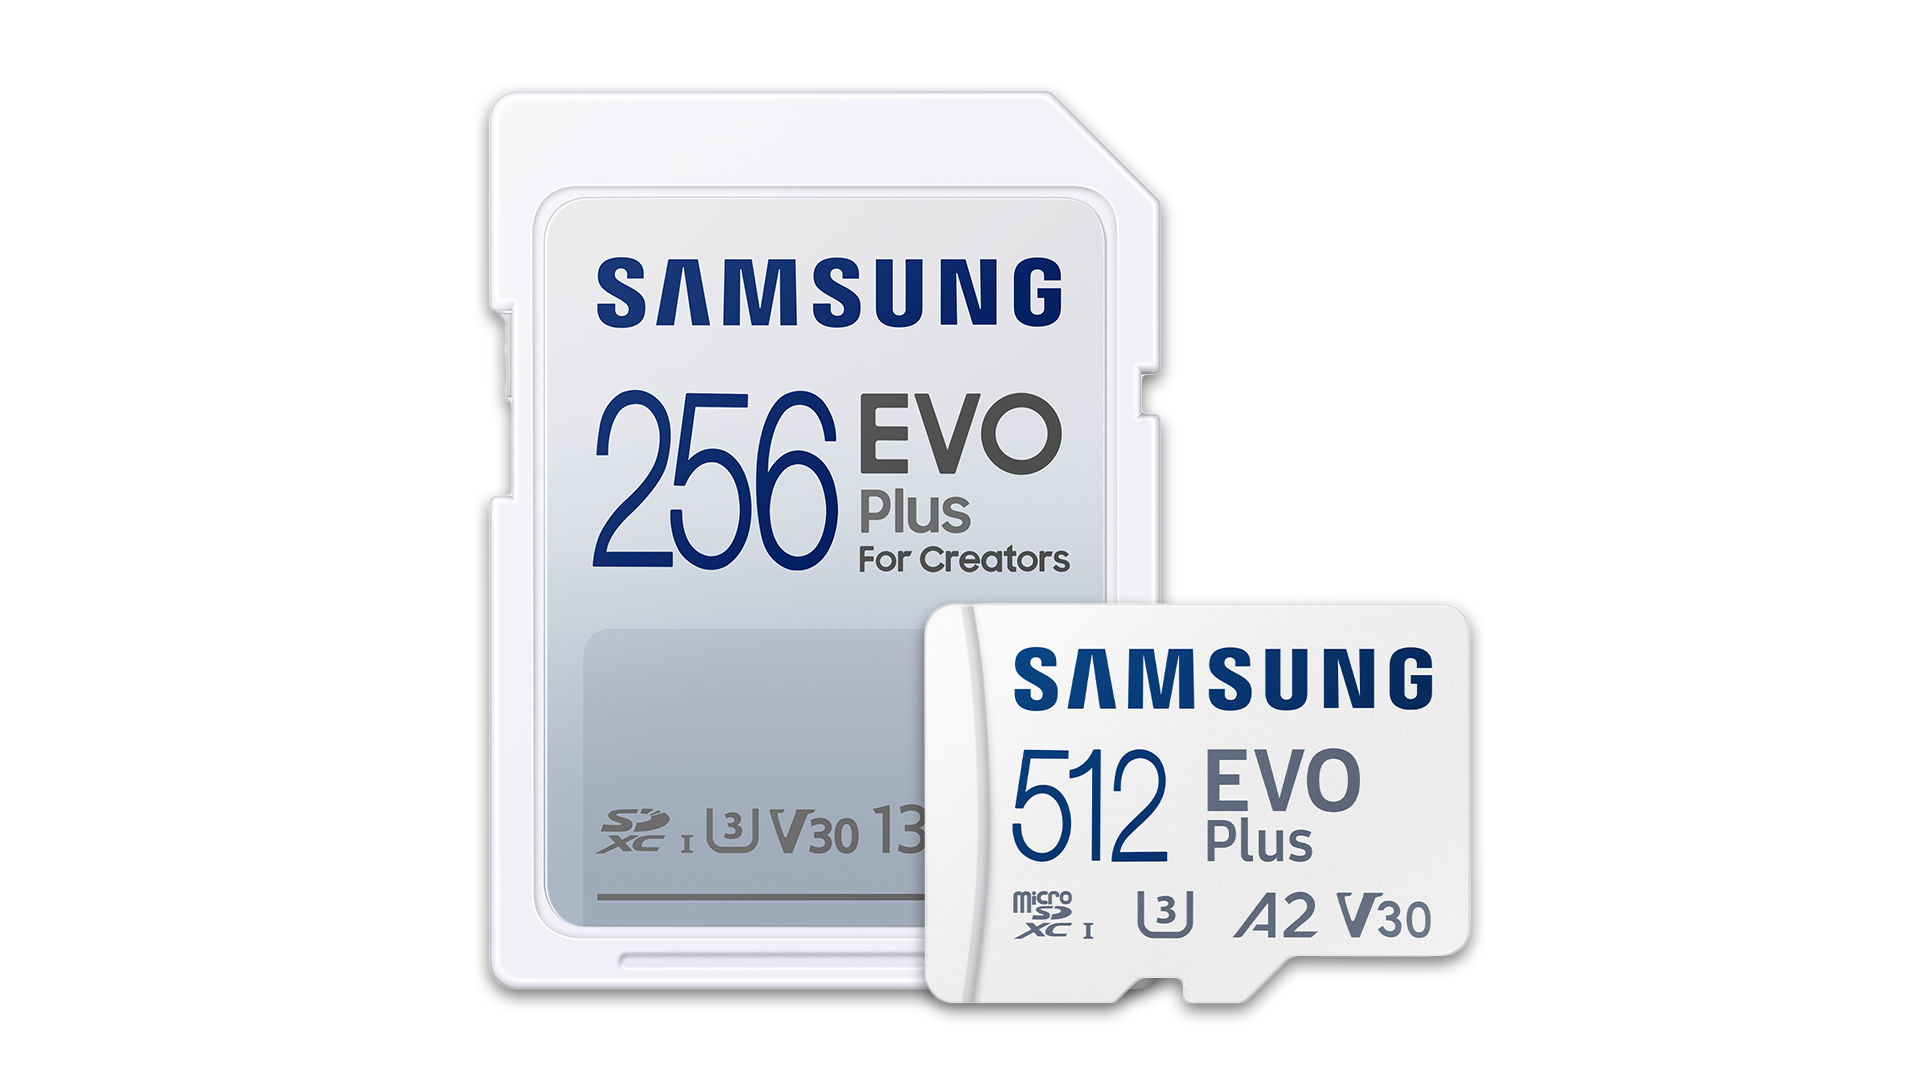 Samsung’s New SD Cards Are Optimized for 4K Video